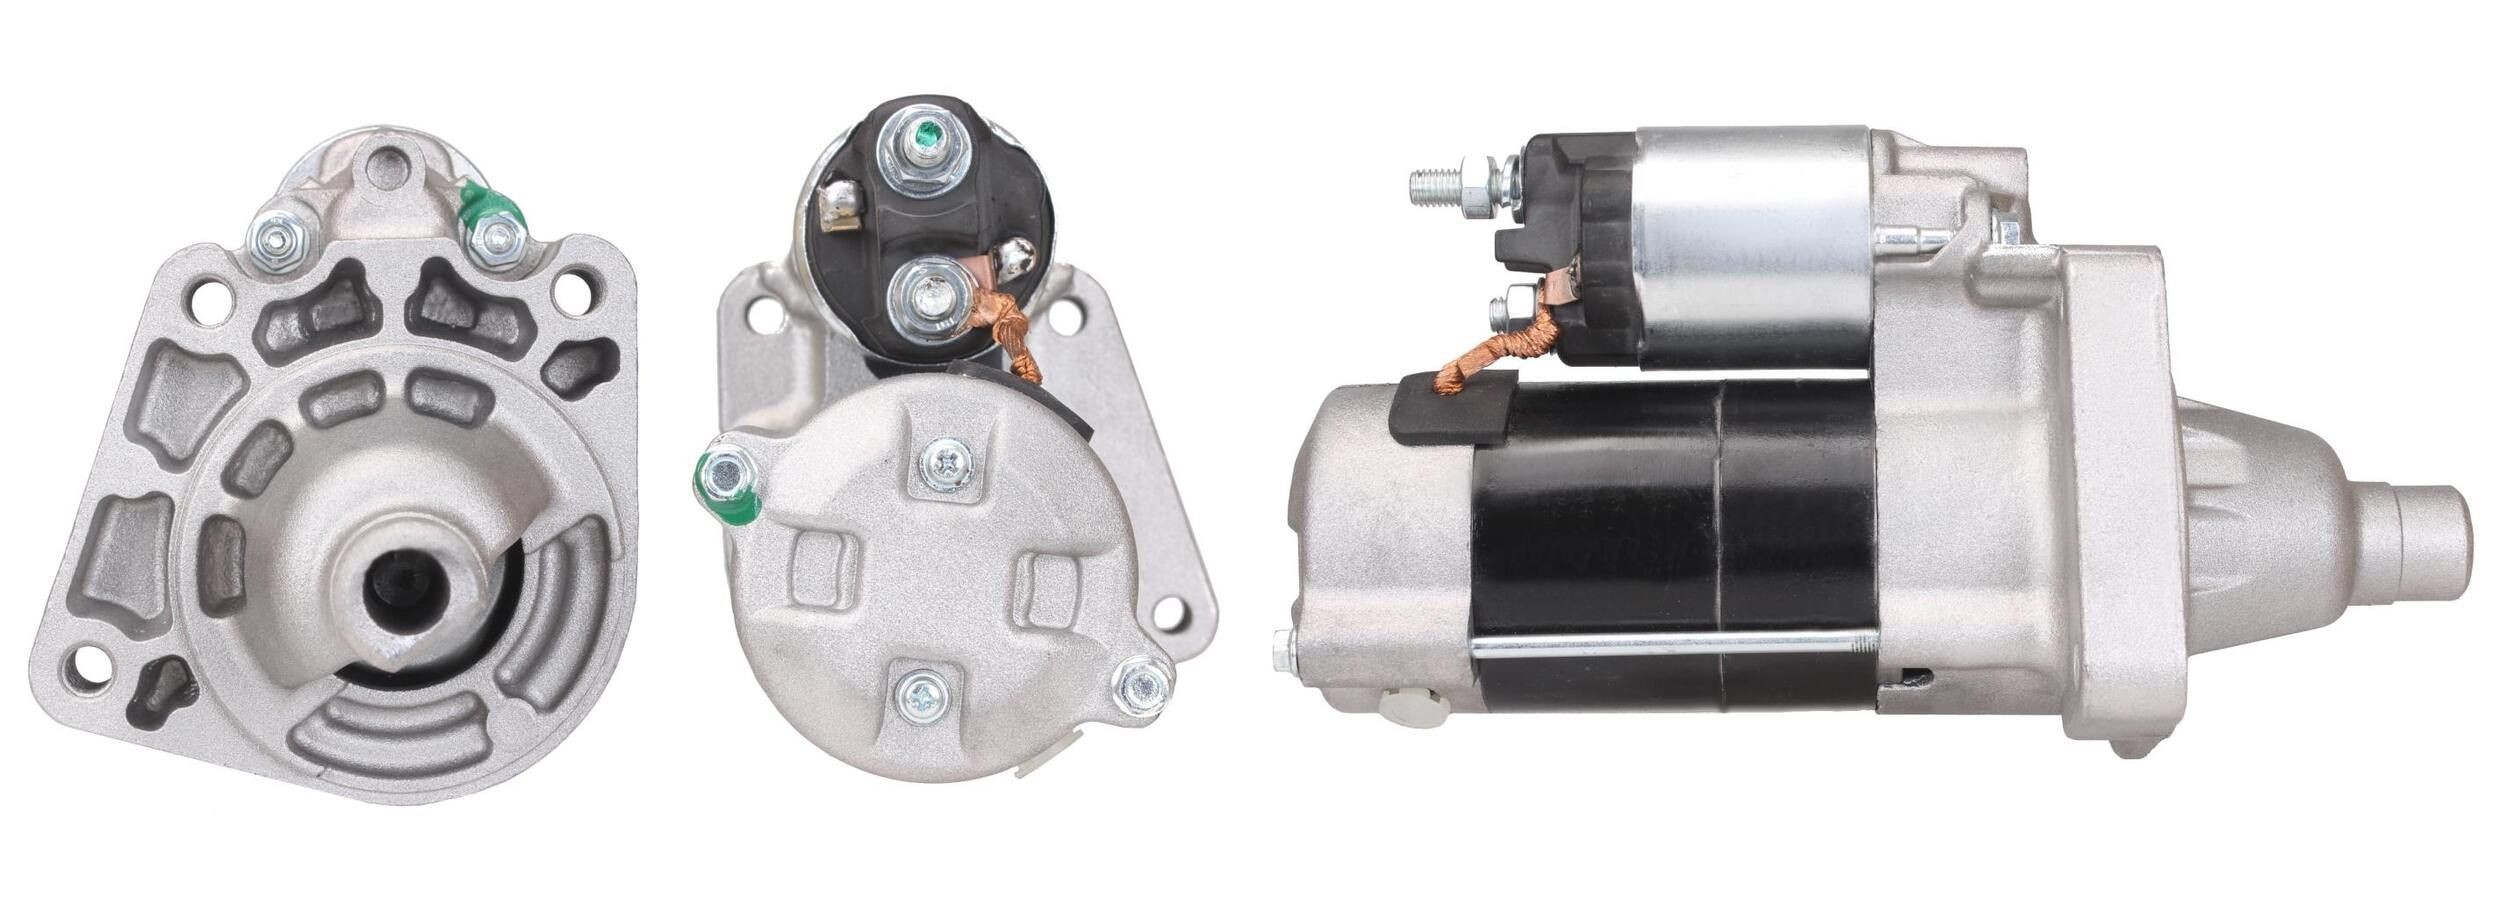 ELSTOCK 25-5104 Starter motor JEEP experience and price